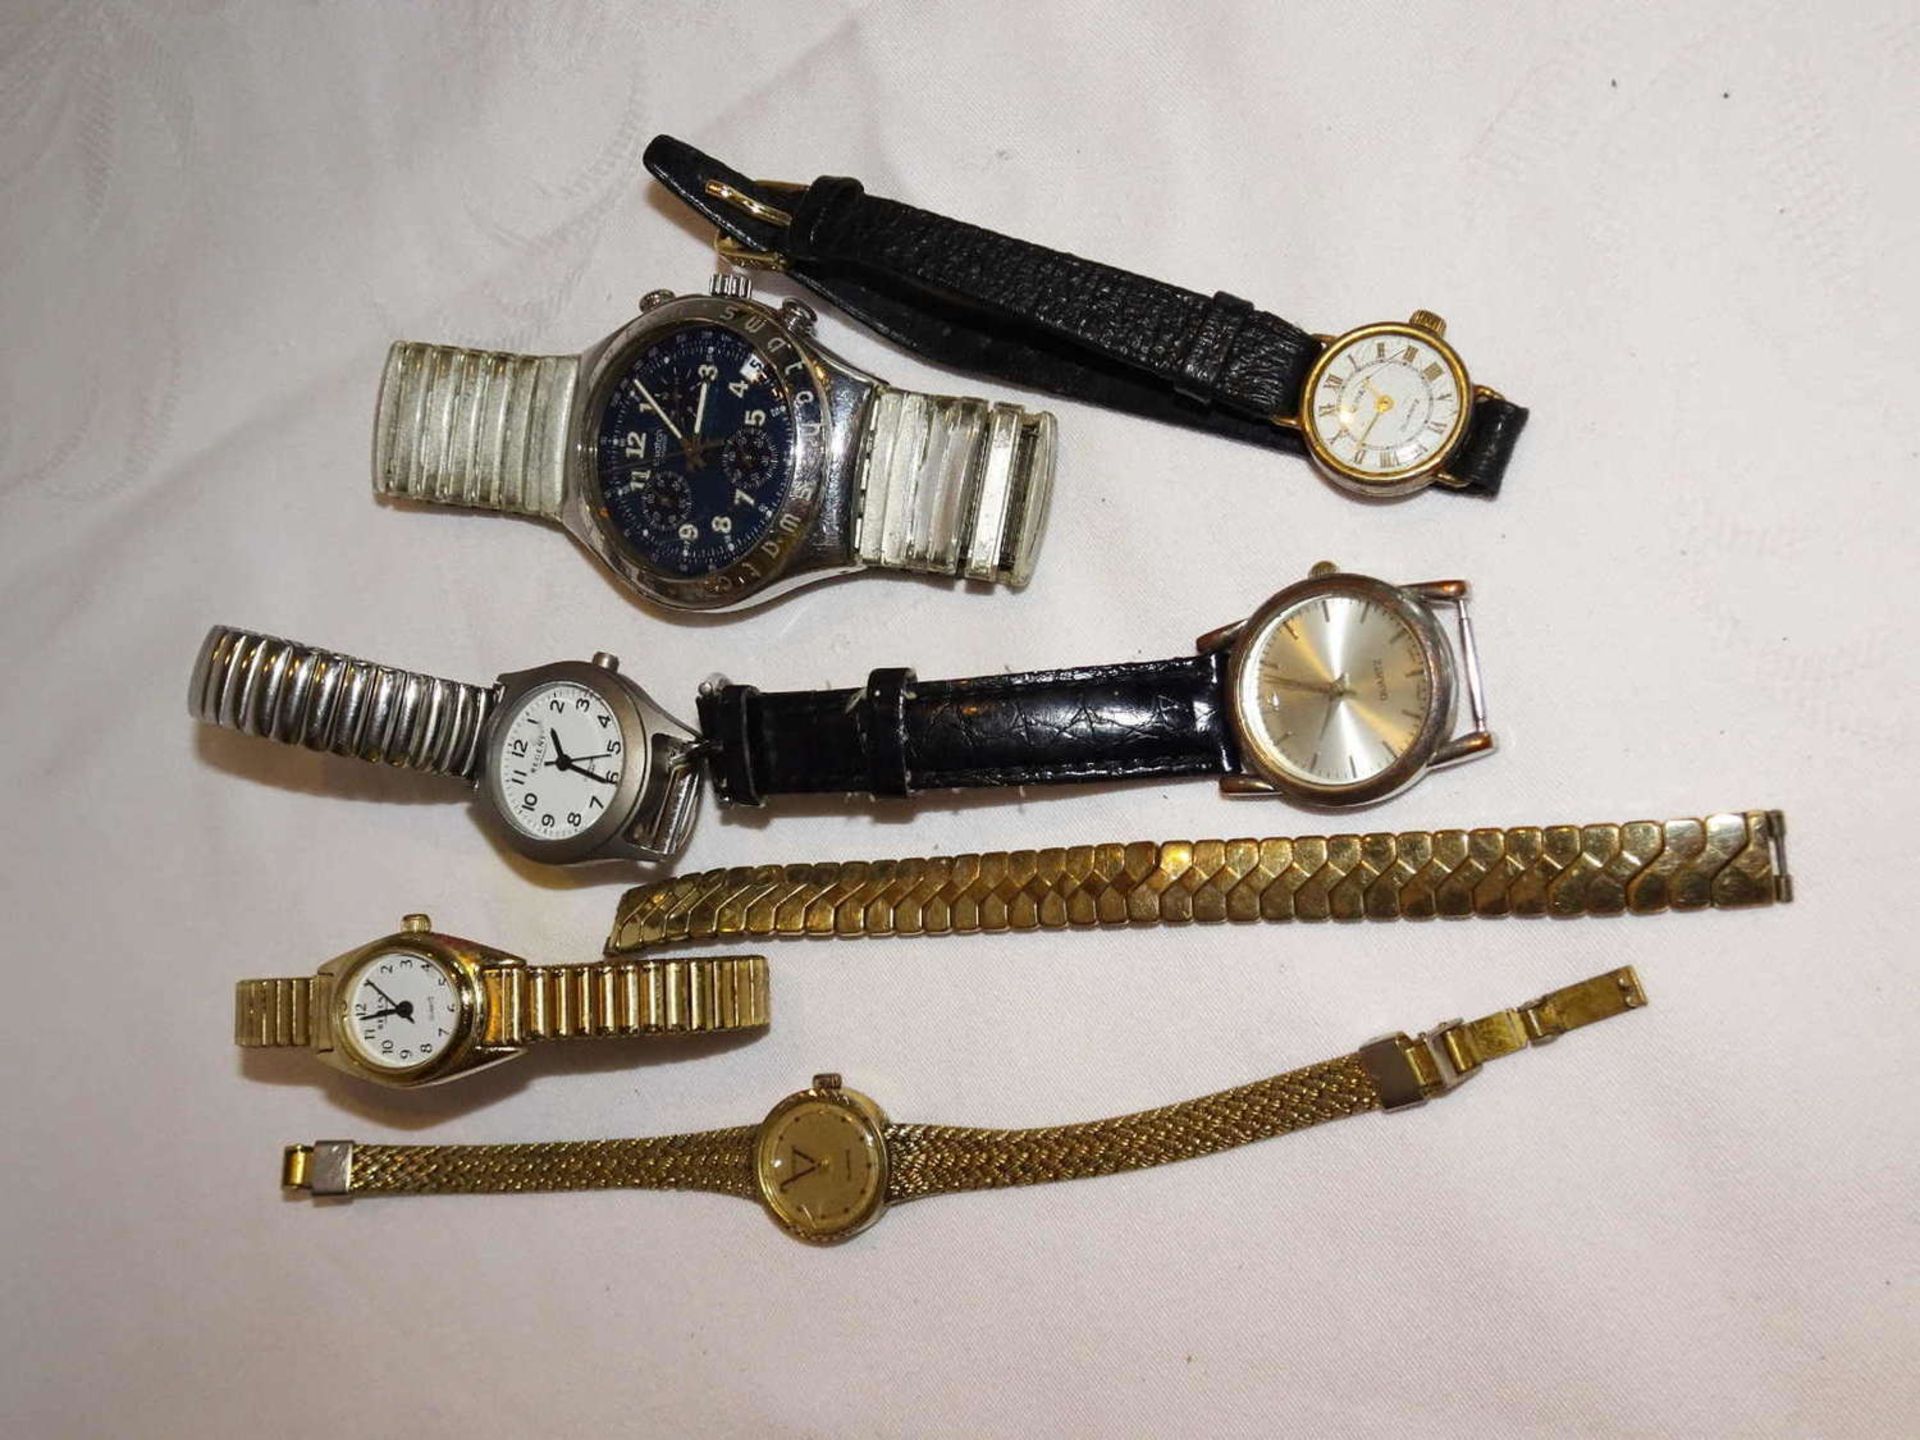 Lot of wristwatches from household dissolution, please have a look! Function not checked.